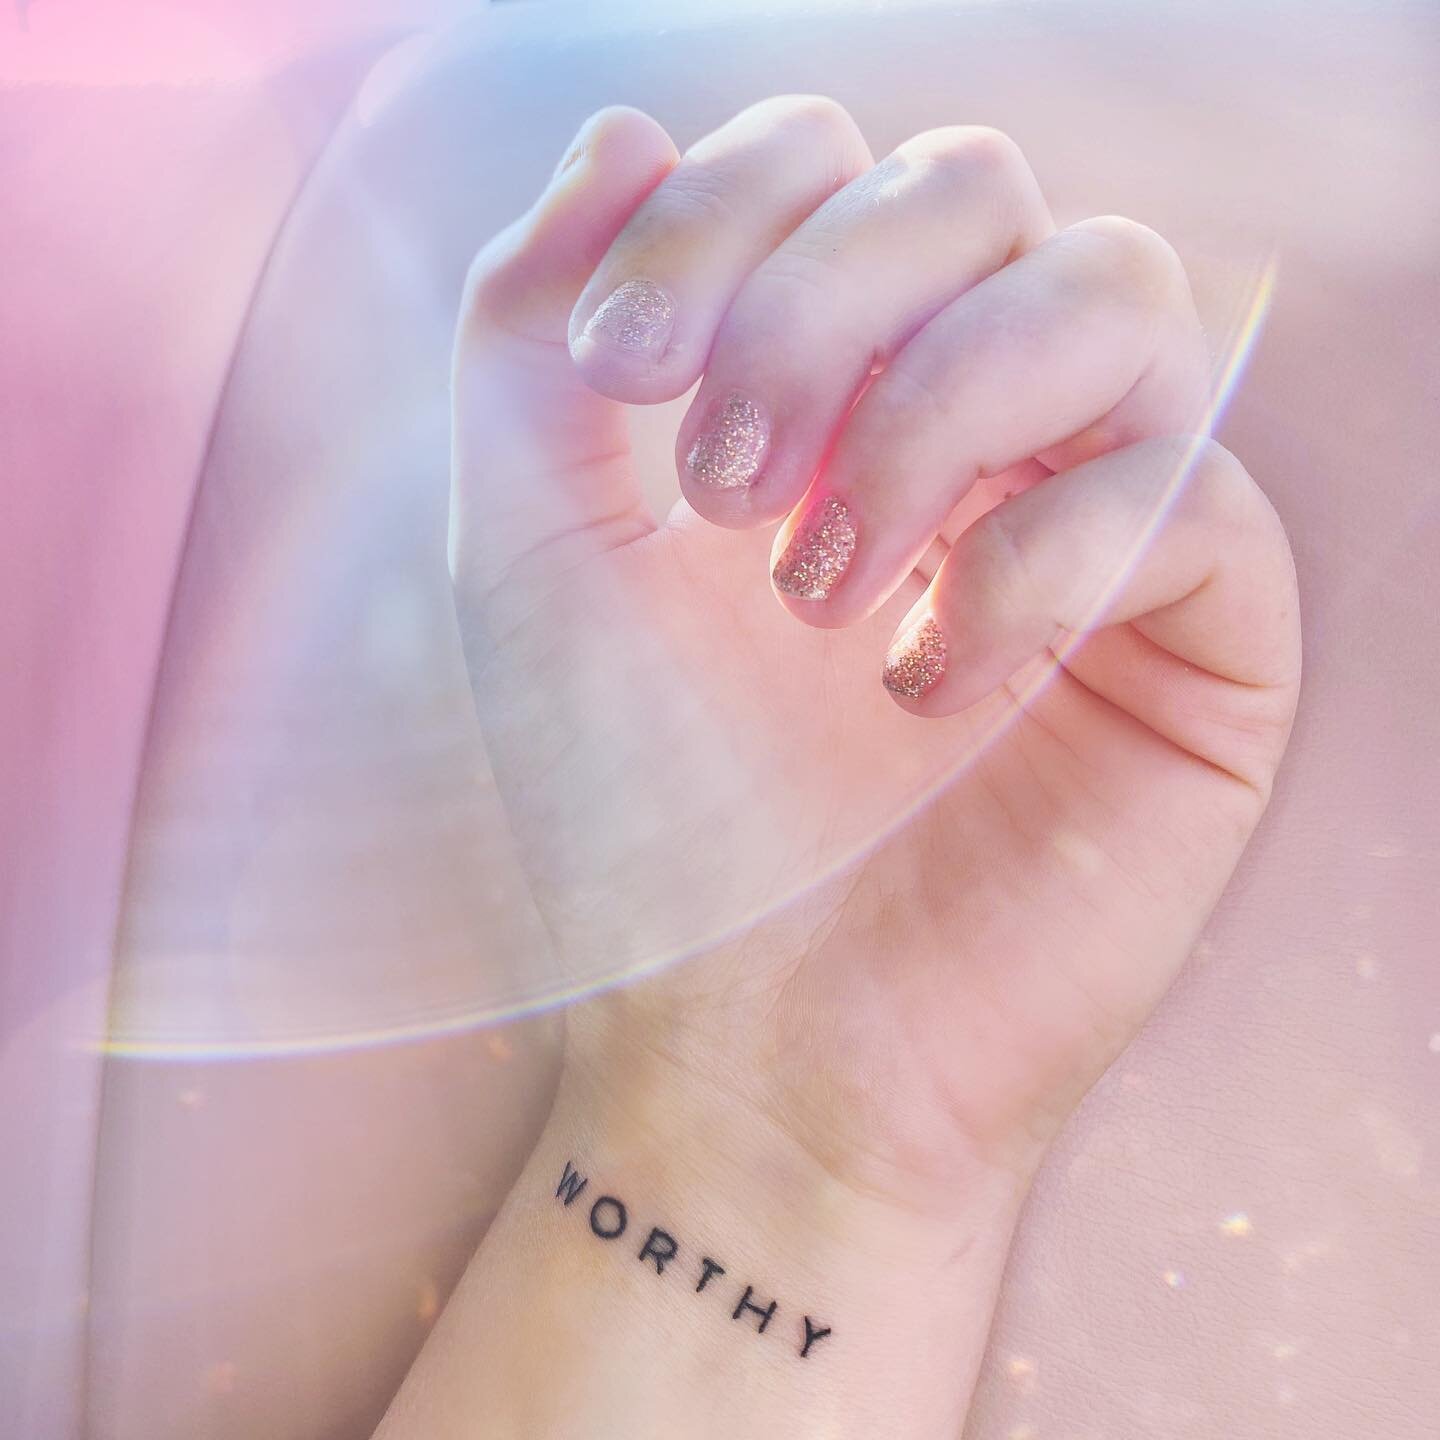 wor&middot;​thy&nbsp;|&nbsp;\&nbsp;ˈwər-t͟hē
having sufficient worth or importance✨

every time I glance at my left wrist, I get a daily reminder that I&rsquo;m W O R T H Y of pursuing everything I&rsquo;ve wanted. ✨ the gratitude I have for this pa